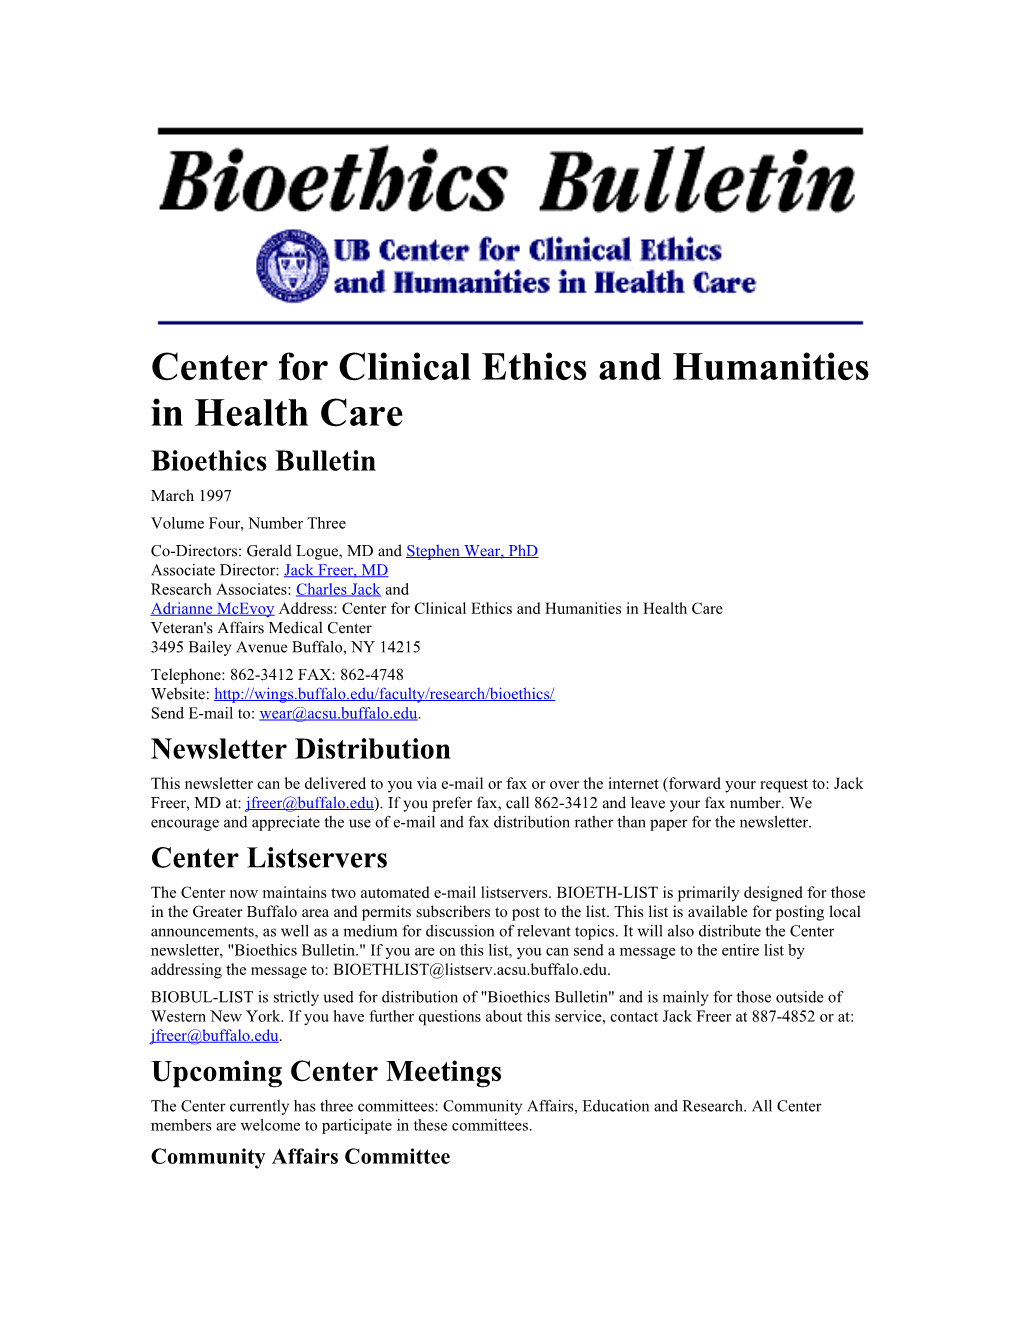 Center for Clinical Ethics and Humanities in Health Care